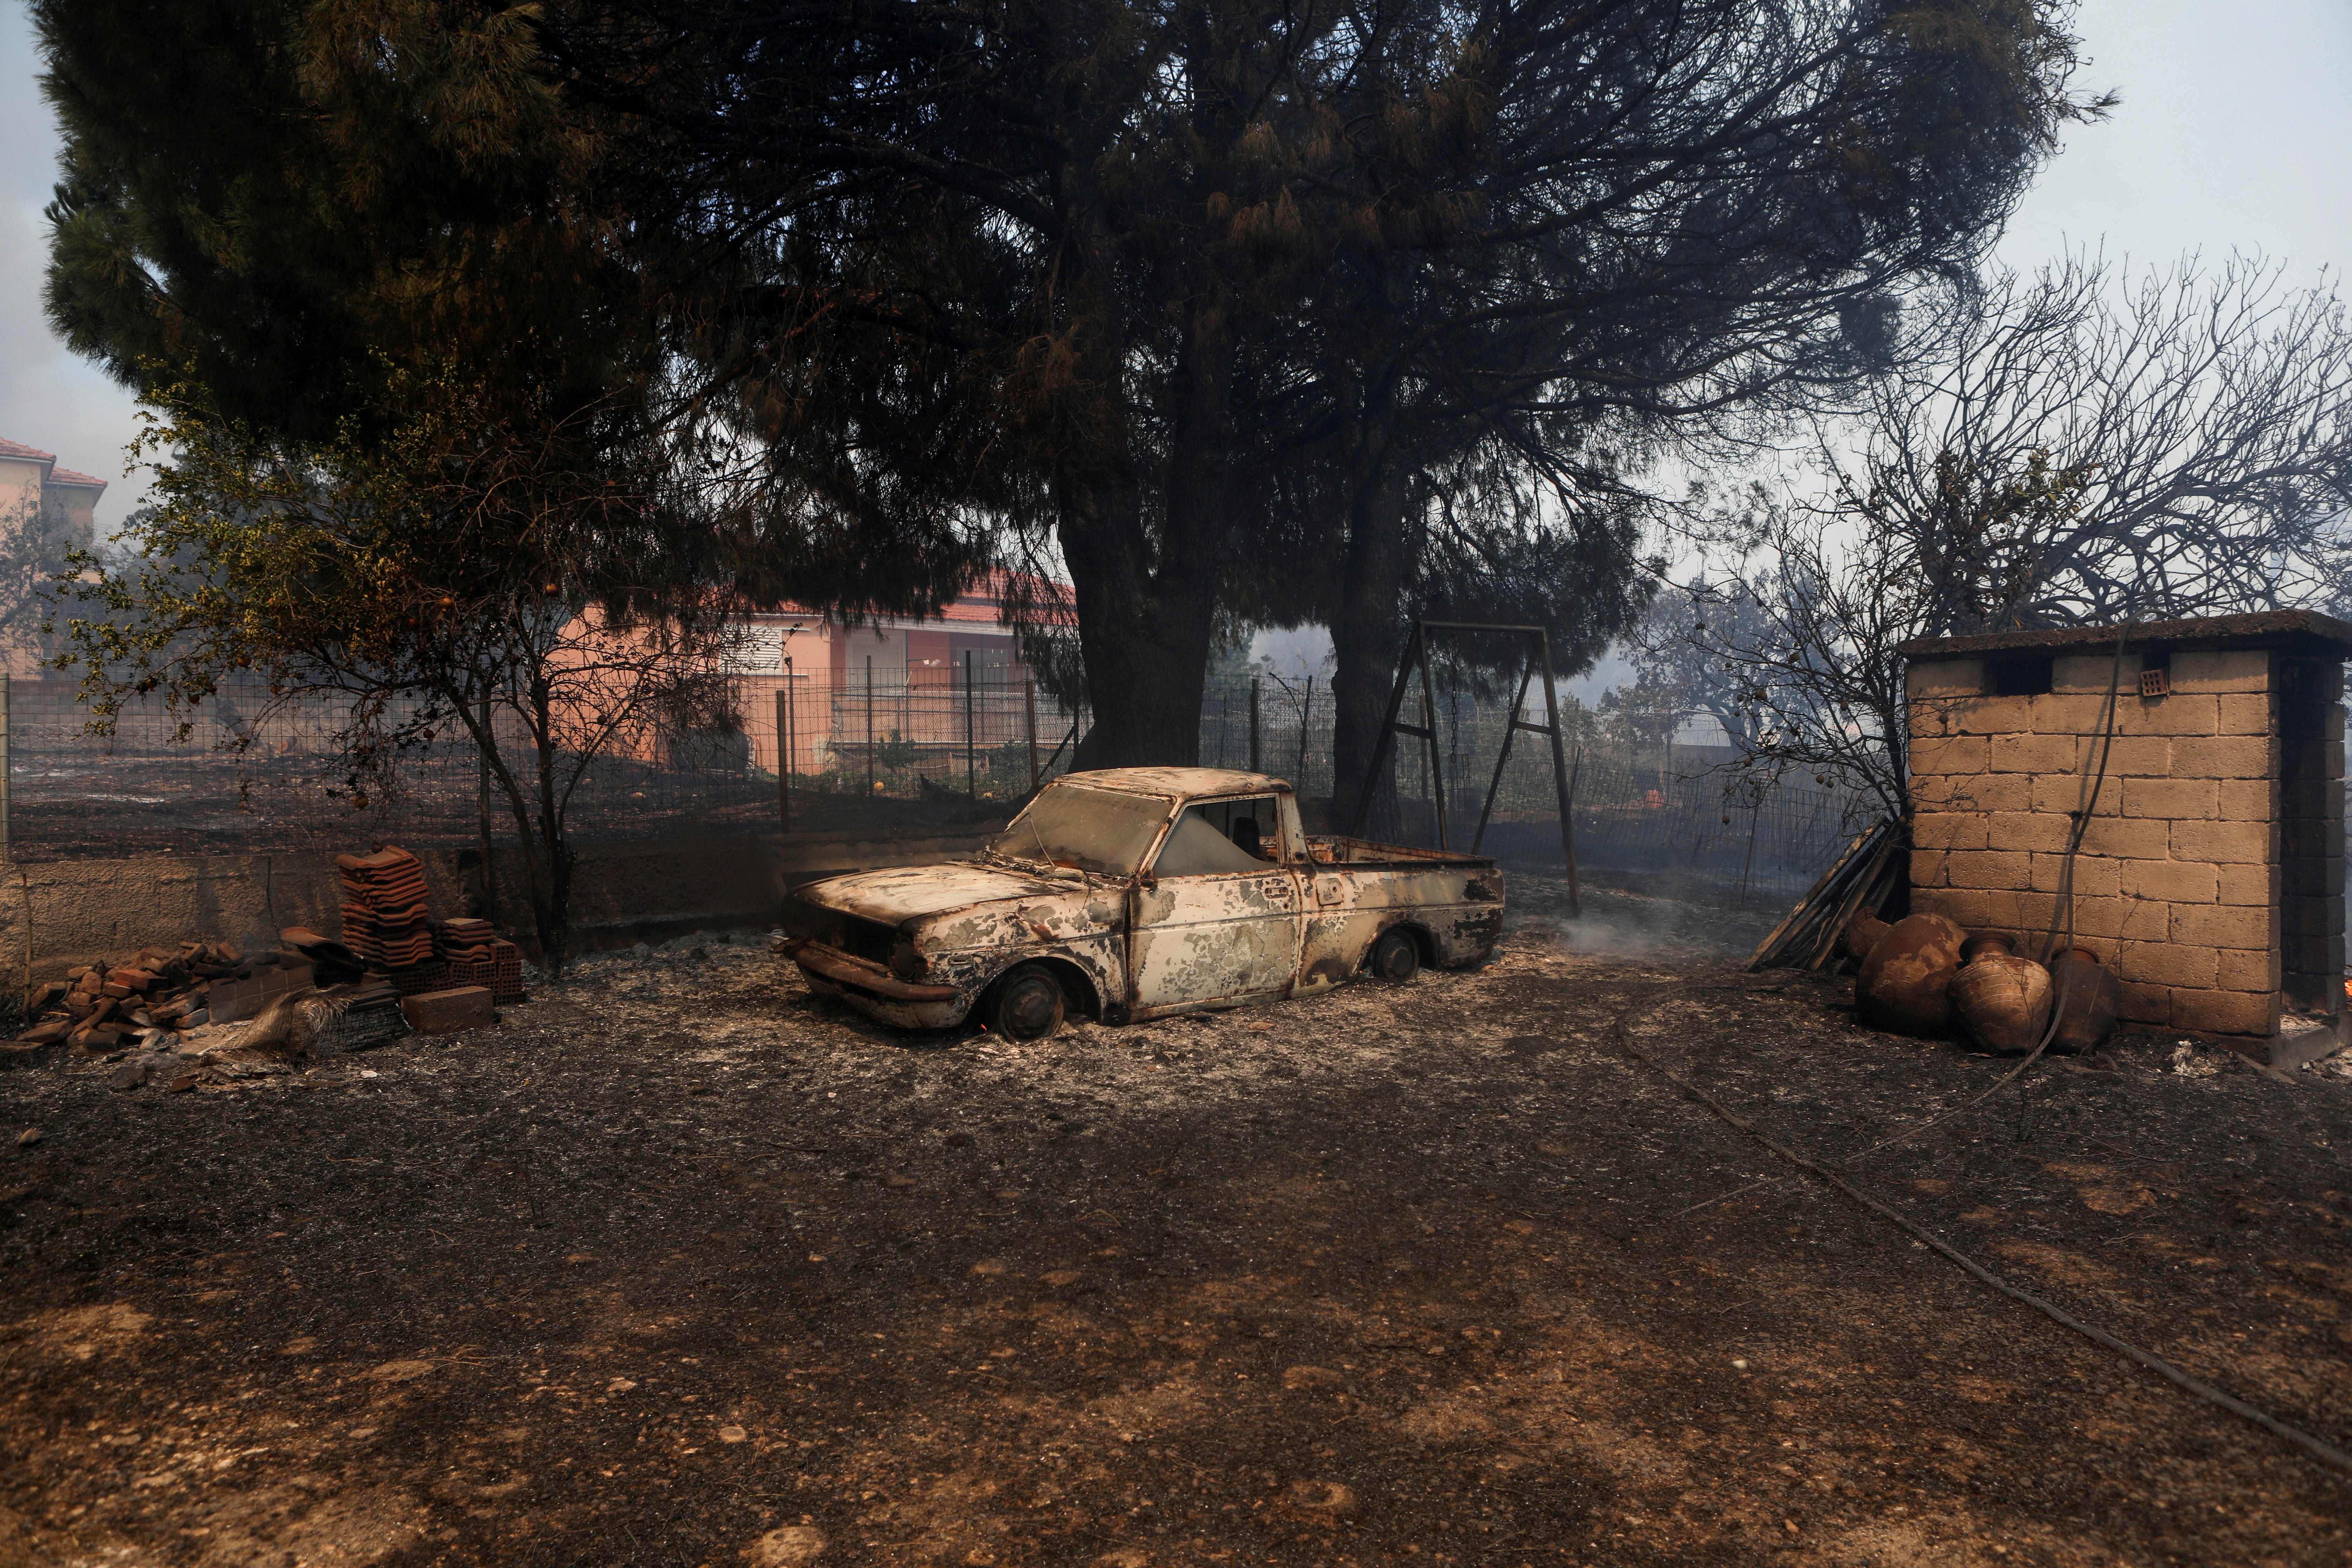 A burned car is seen in a yard as a wildfire rages in Vatera